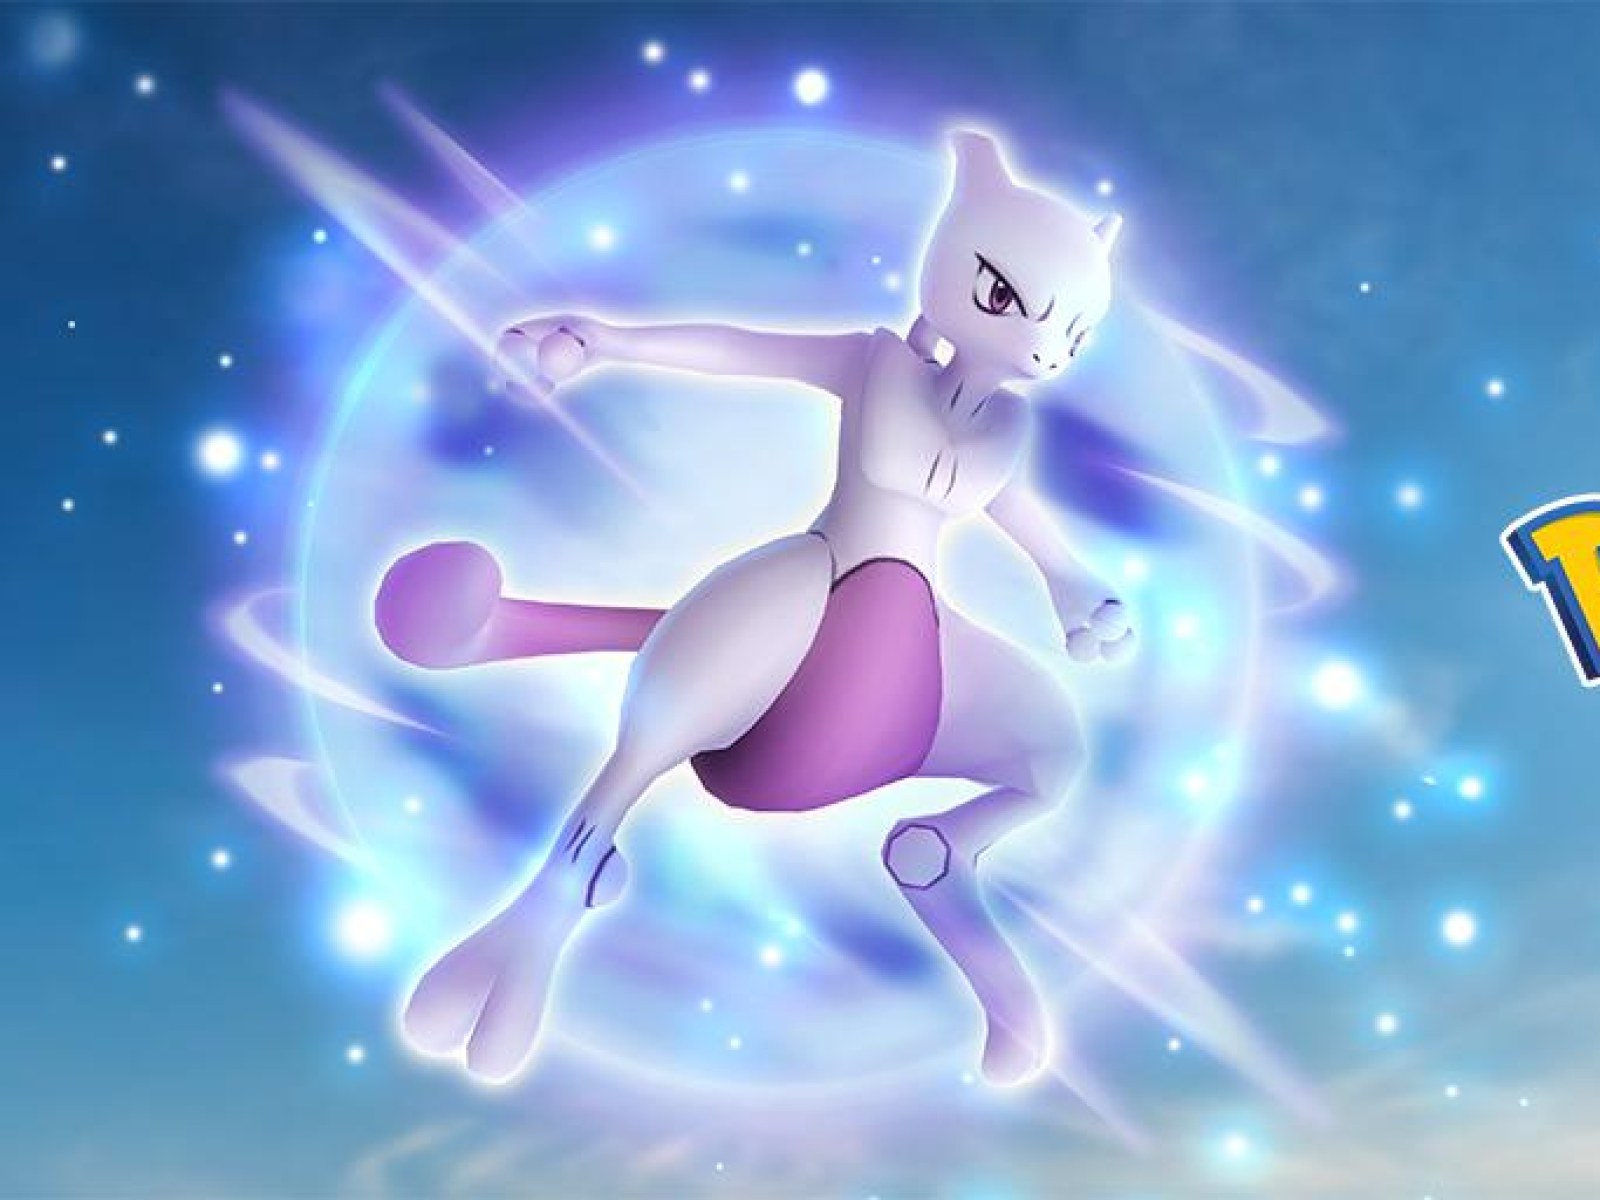 Pokémon Go' Raid Update: Shiny Mewtwo, Counters and Complete List of Bosses